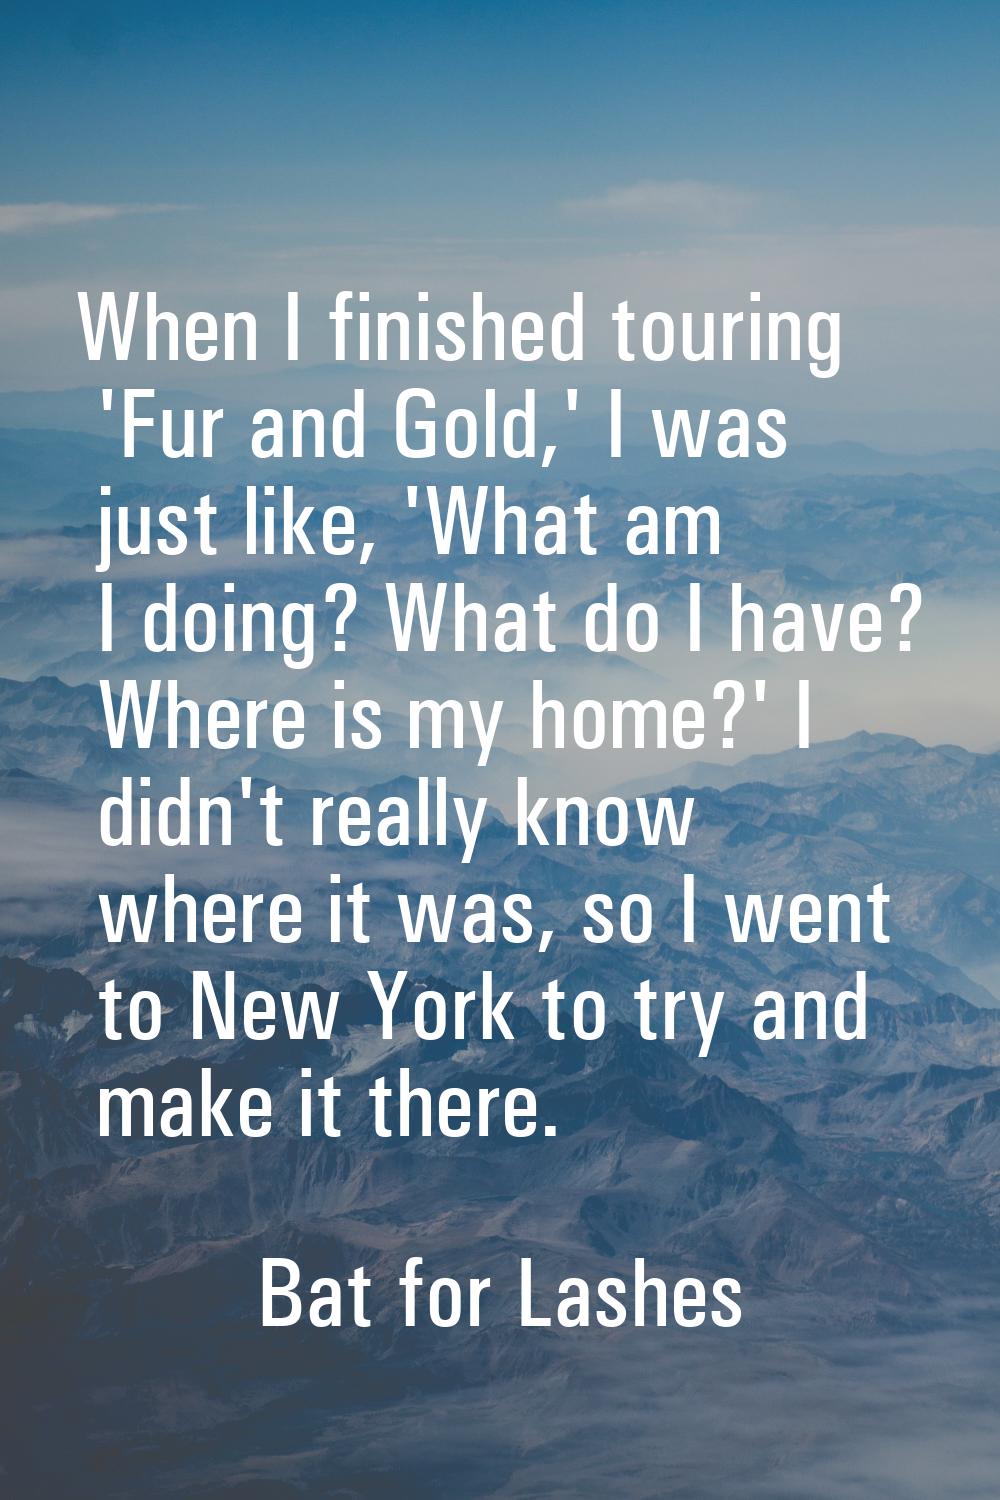 When I finished touring 'Fur and Gold,' I was just like, 'What am I doing? What do I have? Where is